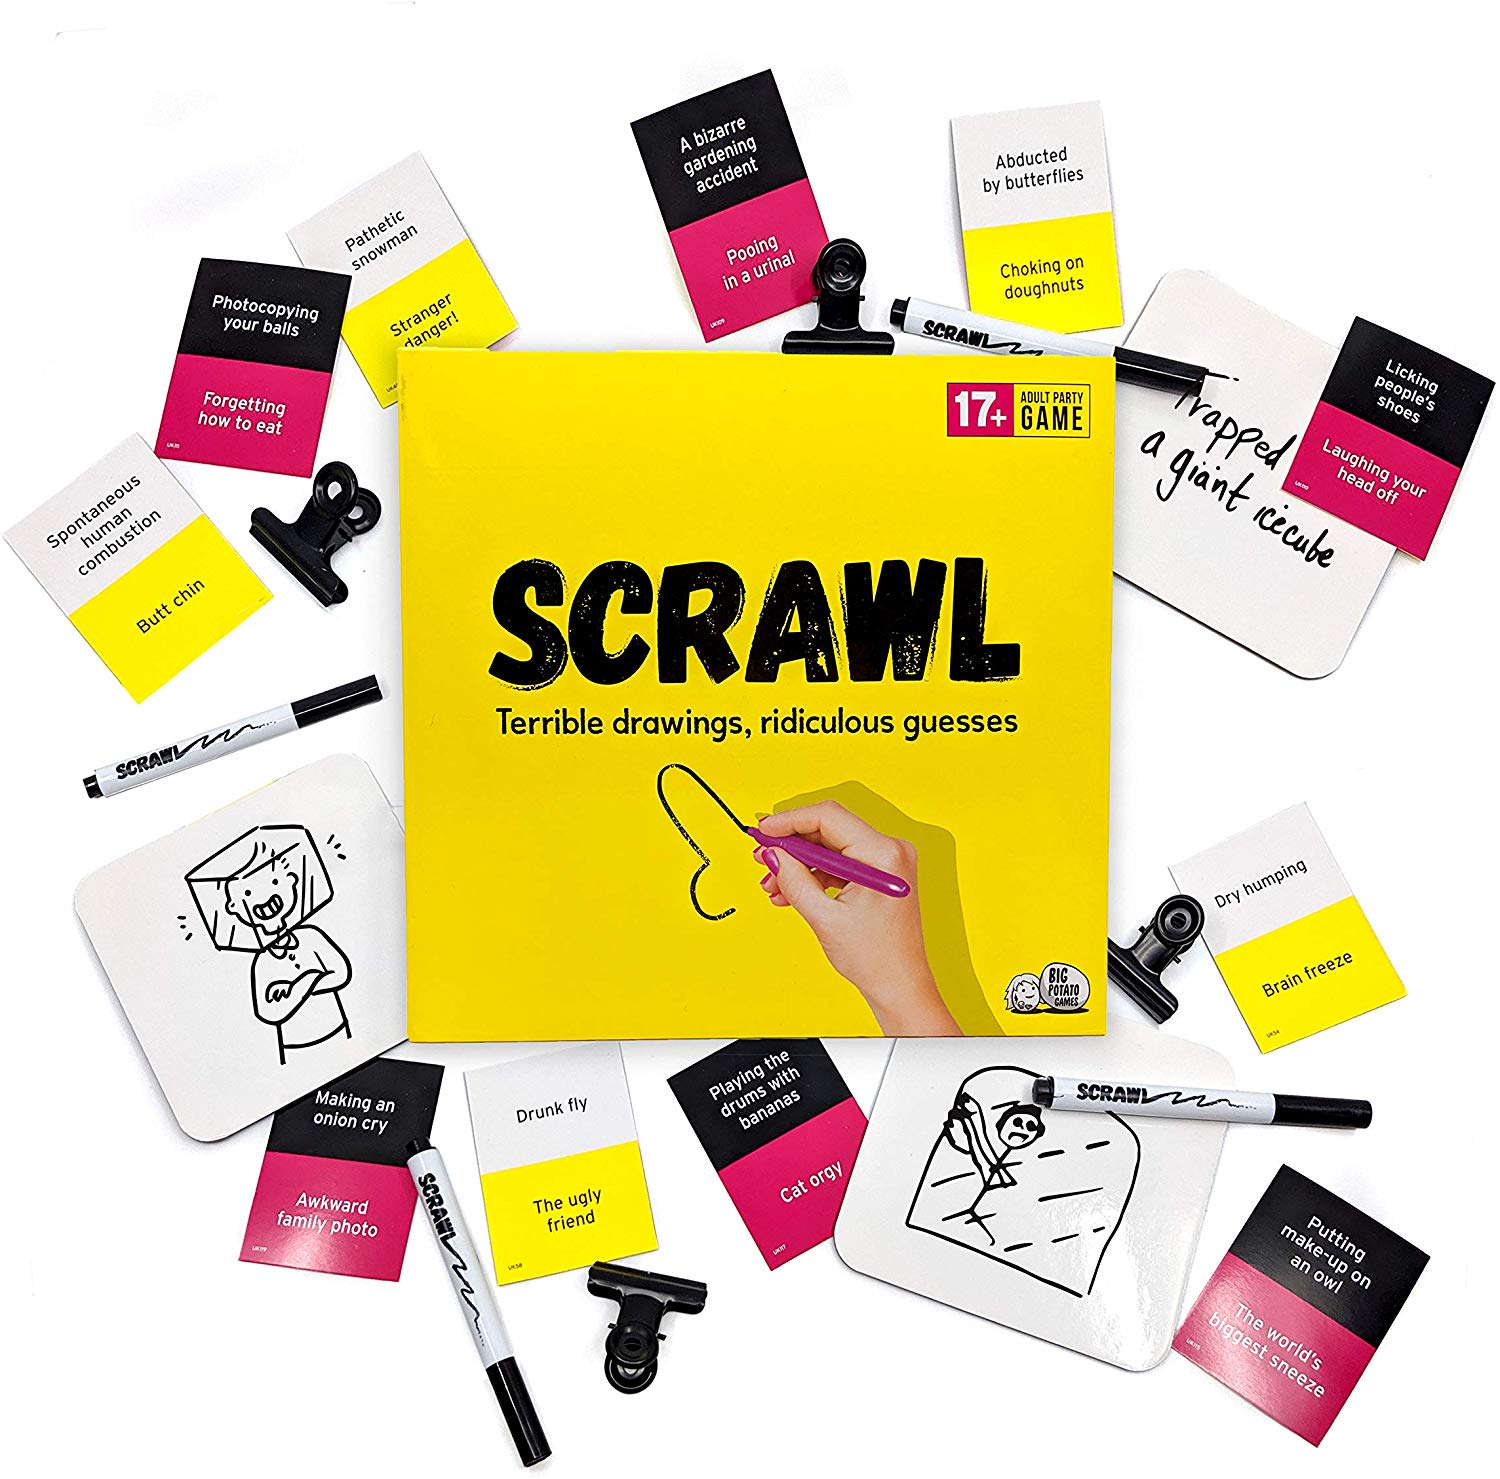 Scrawl board game review: a filthy-minded romp through the